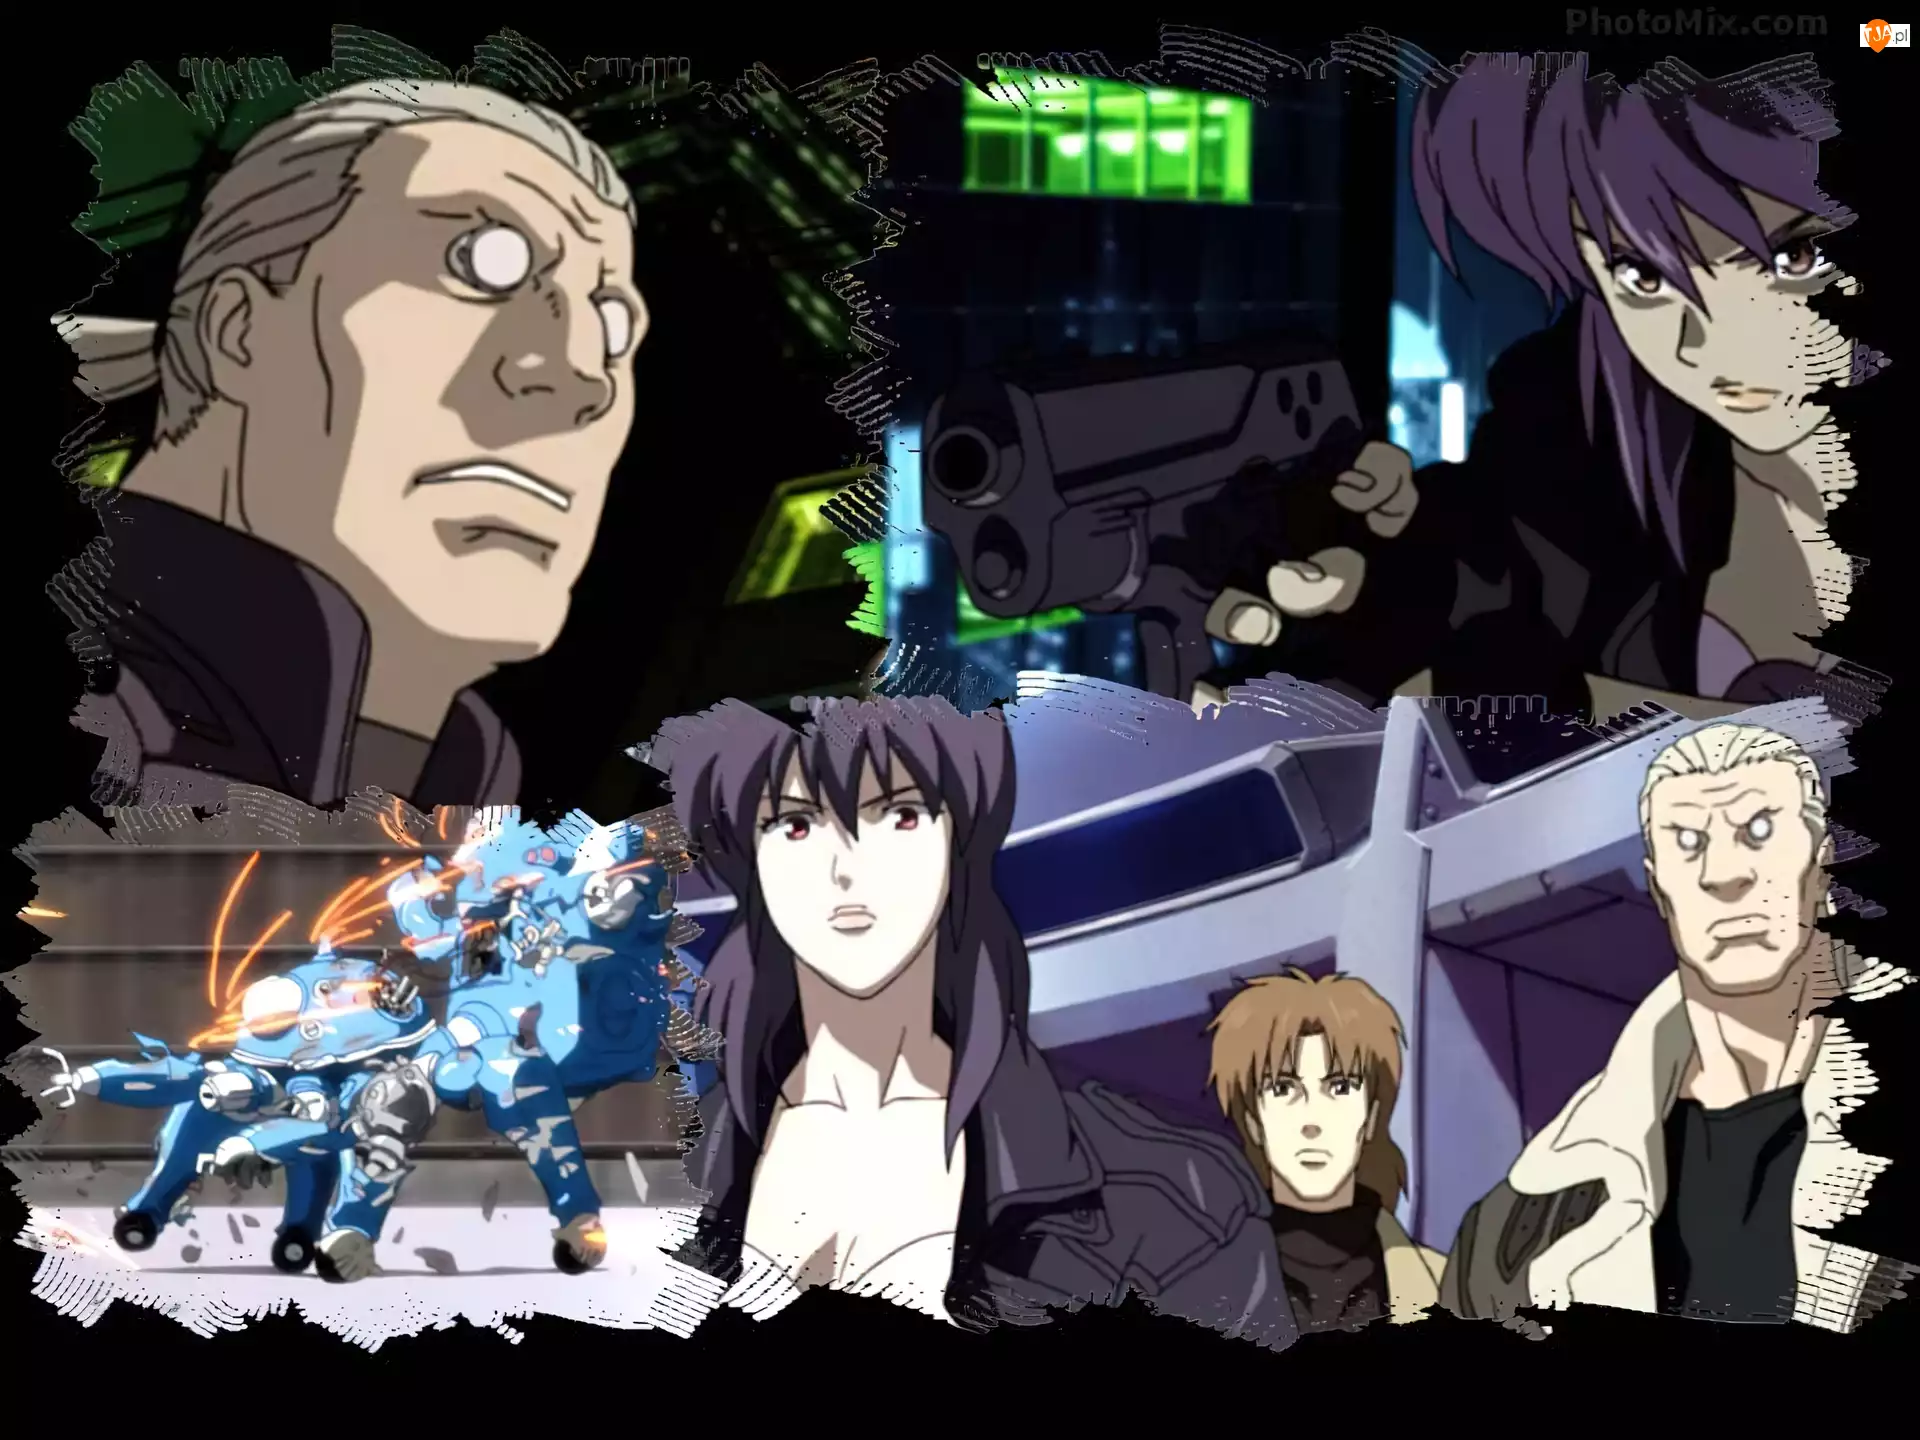 roboty, ludzie, pistolet, Ghost In The Shell